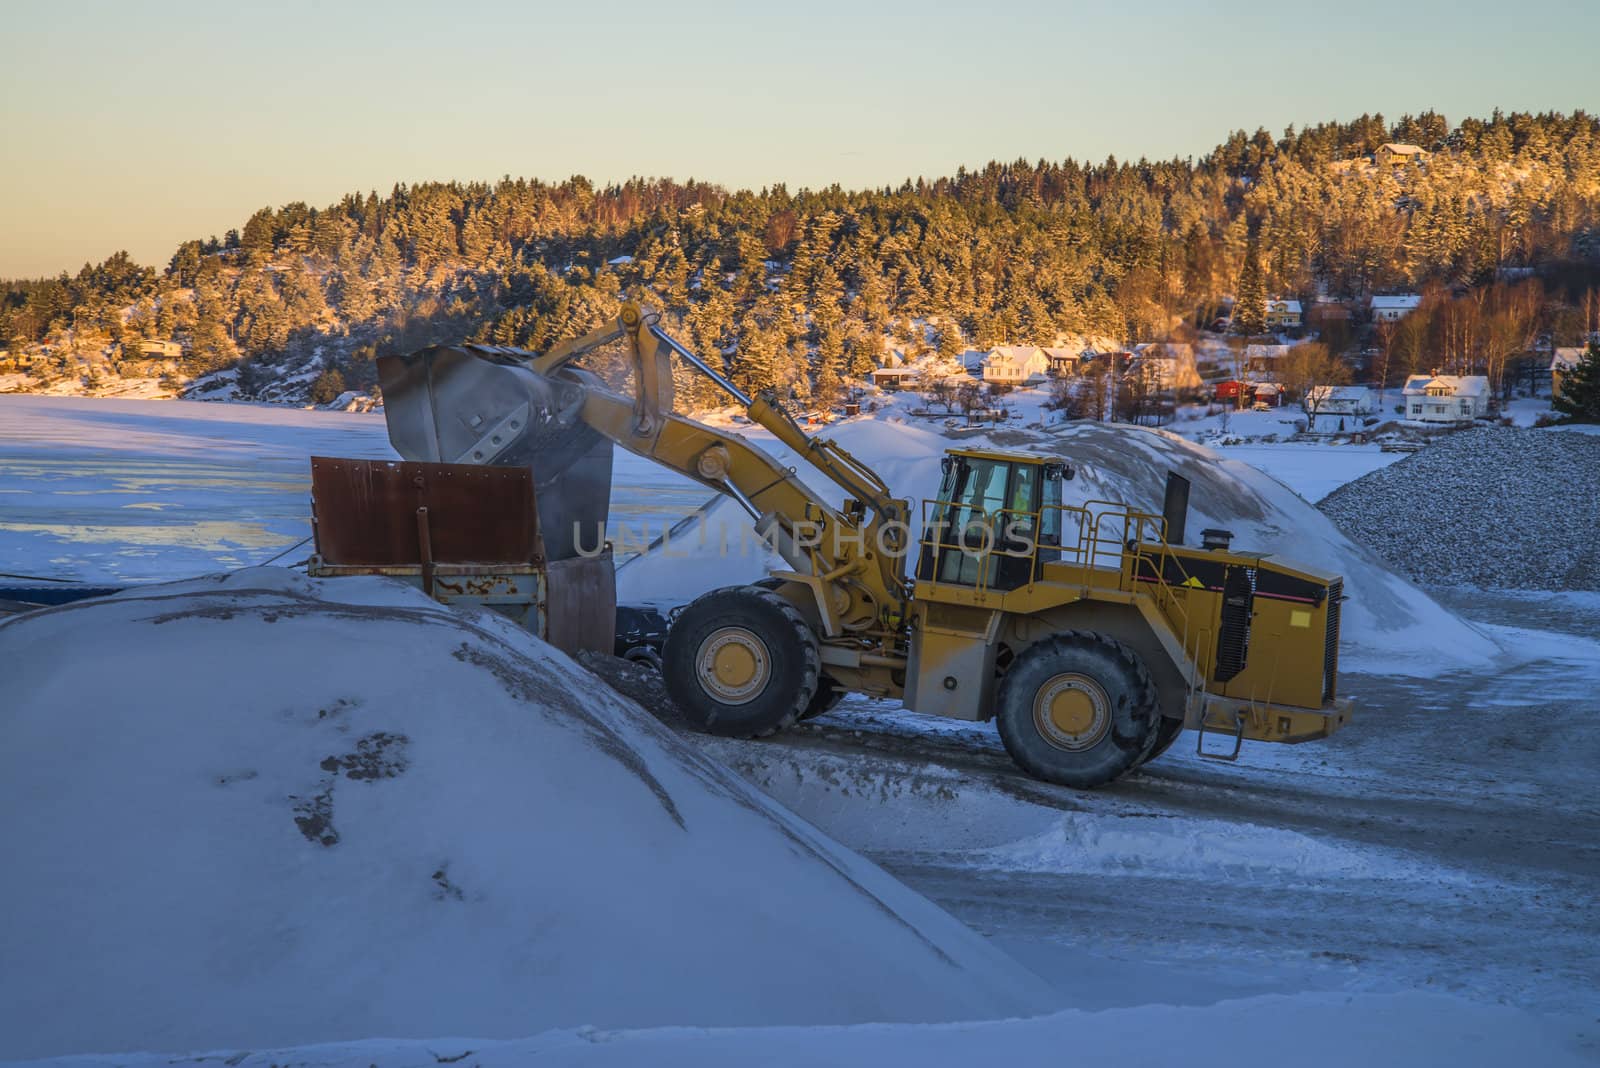 Bakke is a village in Halden and here is located "Brekke" quarry. The quarry is about a kilometer away from "Bakke" shipping harbor where all the gravel, crushed stone and sand are stored and will be shipped out.